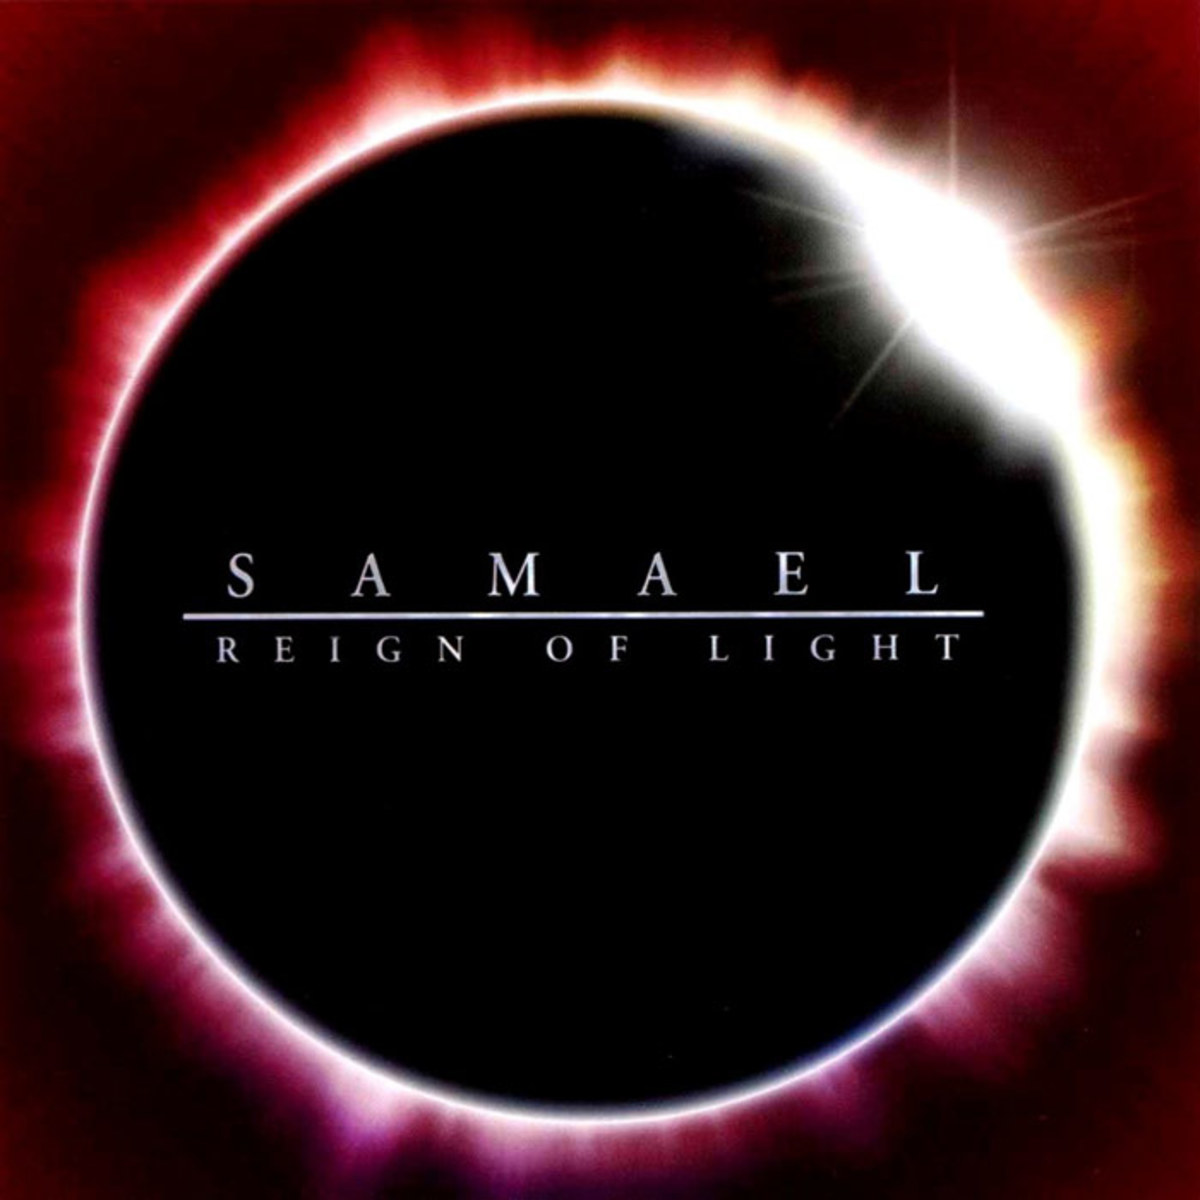 review-of-the-album-reign-of-light-by-swiss-industrial-metal-band-samael